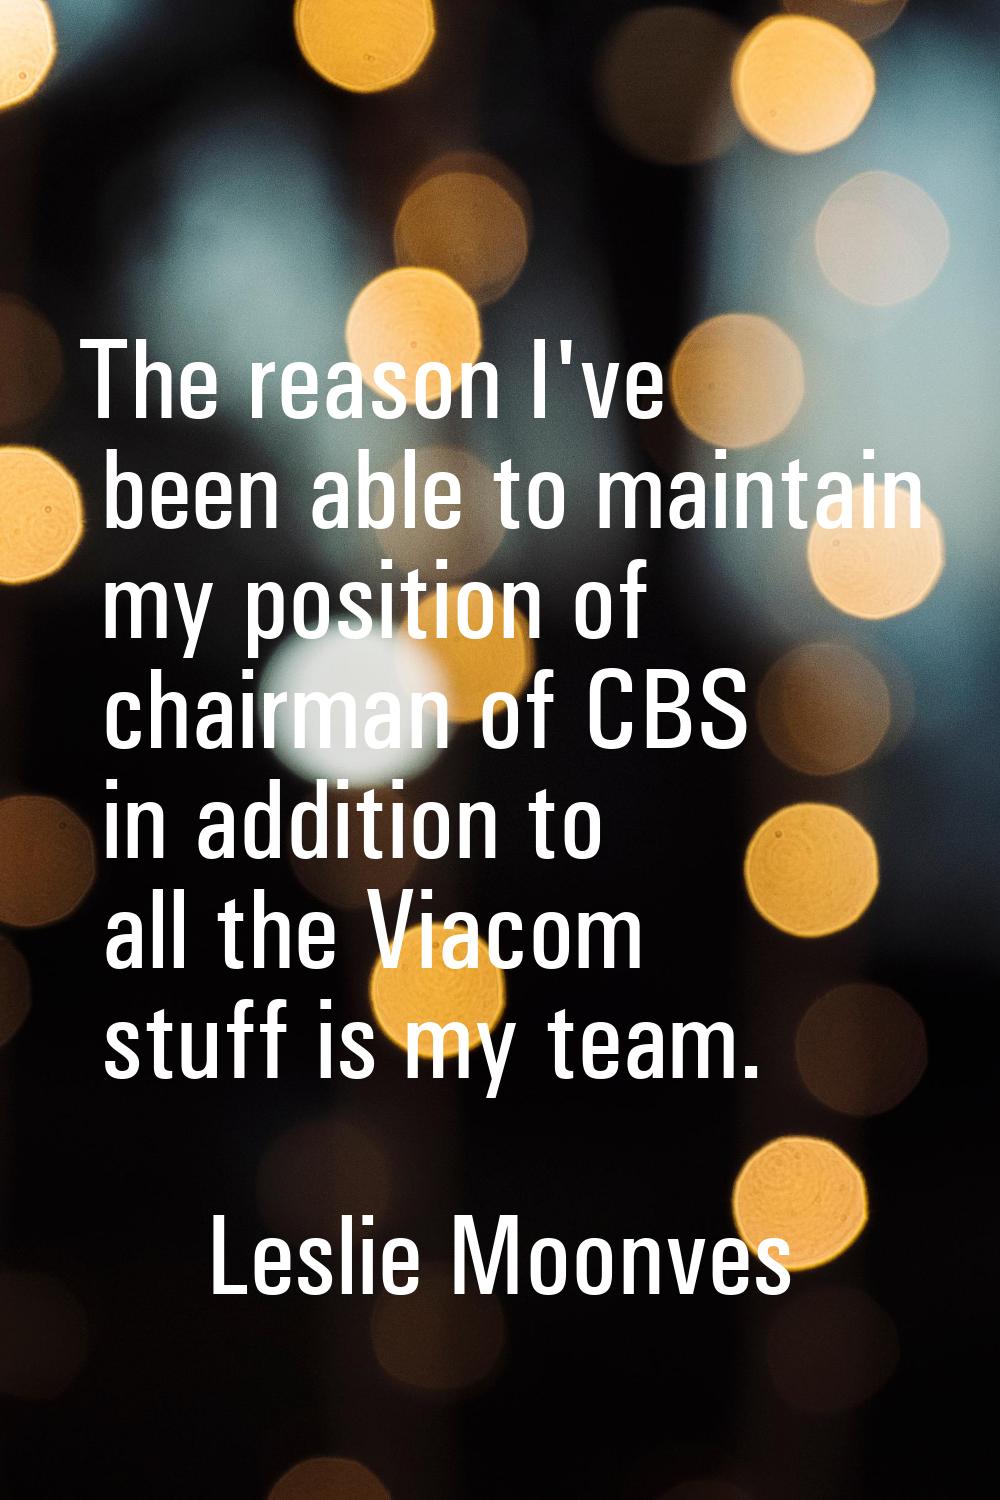 The reason I've been able to maintain my position of chairman of CBS in addition to all the Viacom 